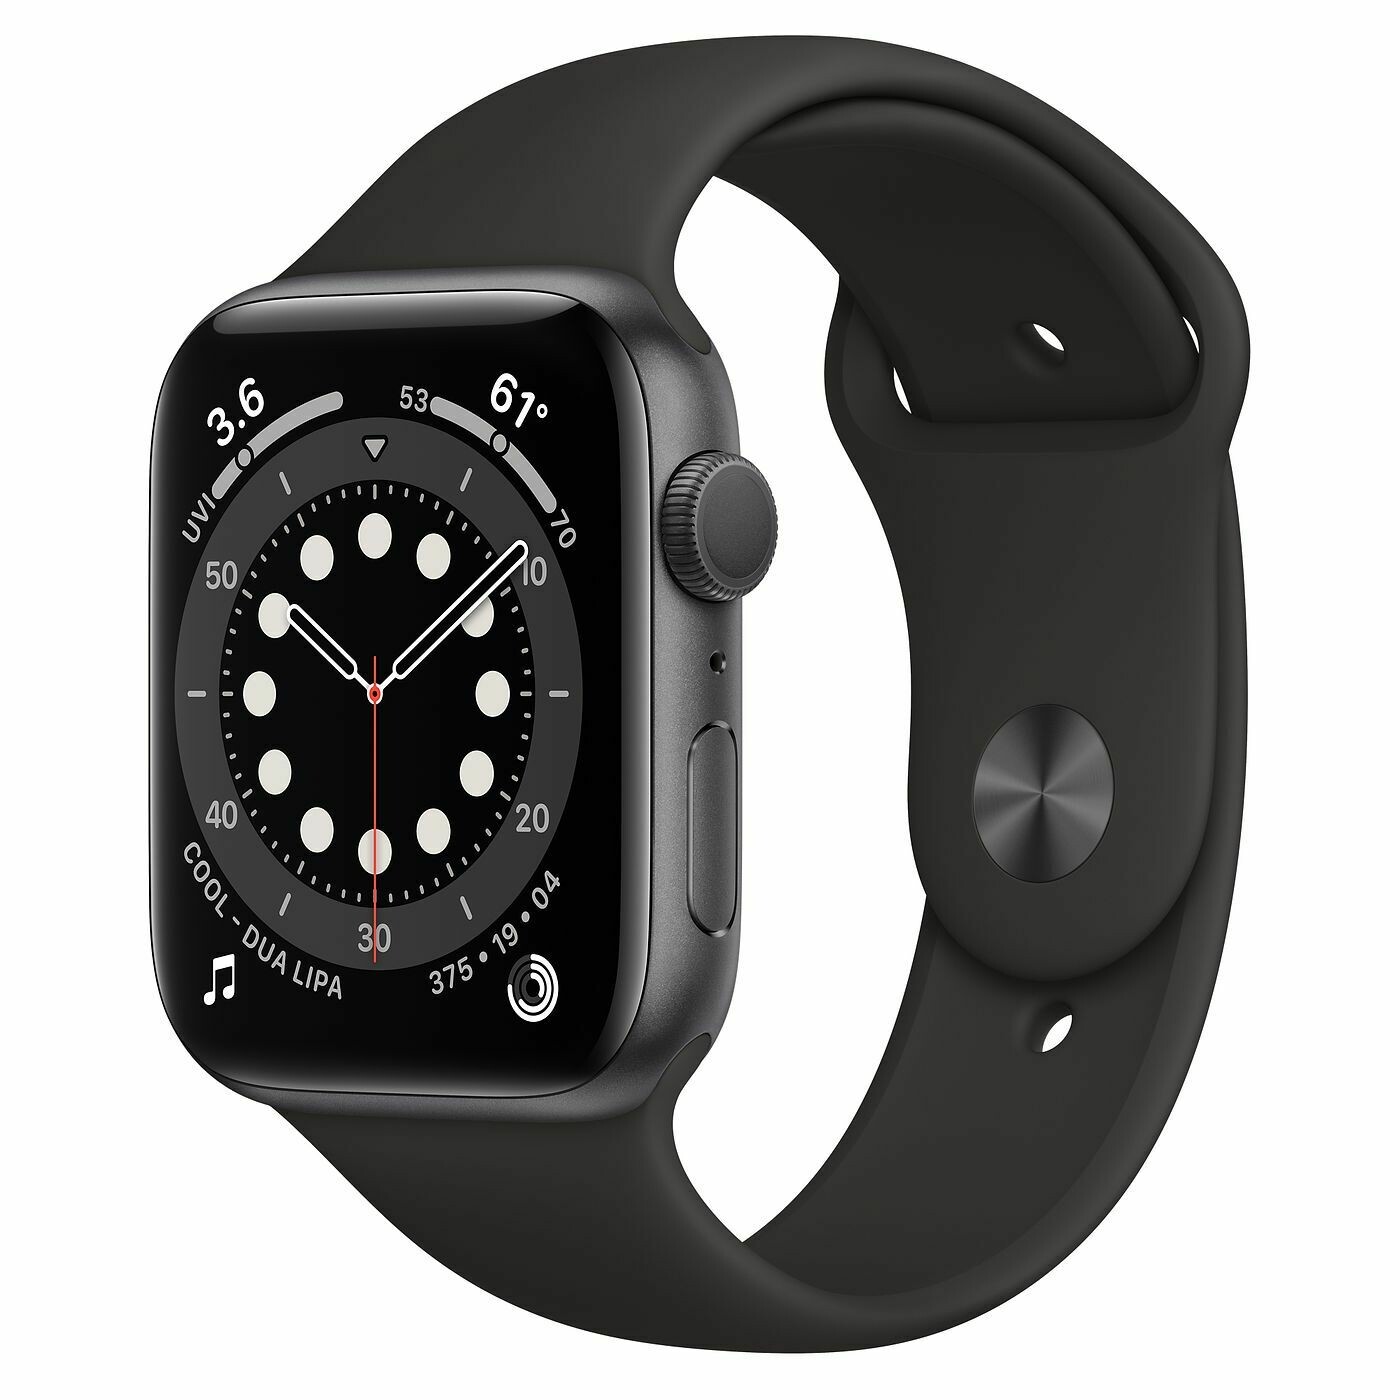 New Apple Watch Series 7 (GPS, 45mm) - Space Gray Aluminum Case with Black Sport Band